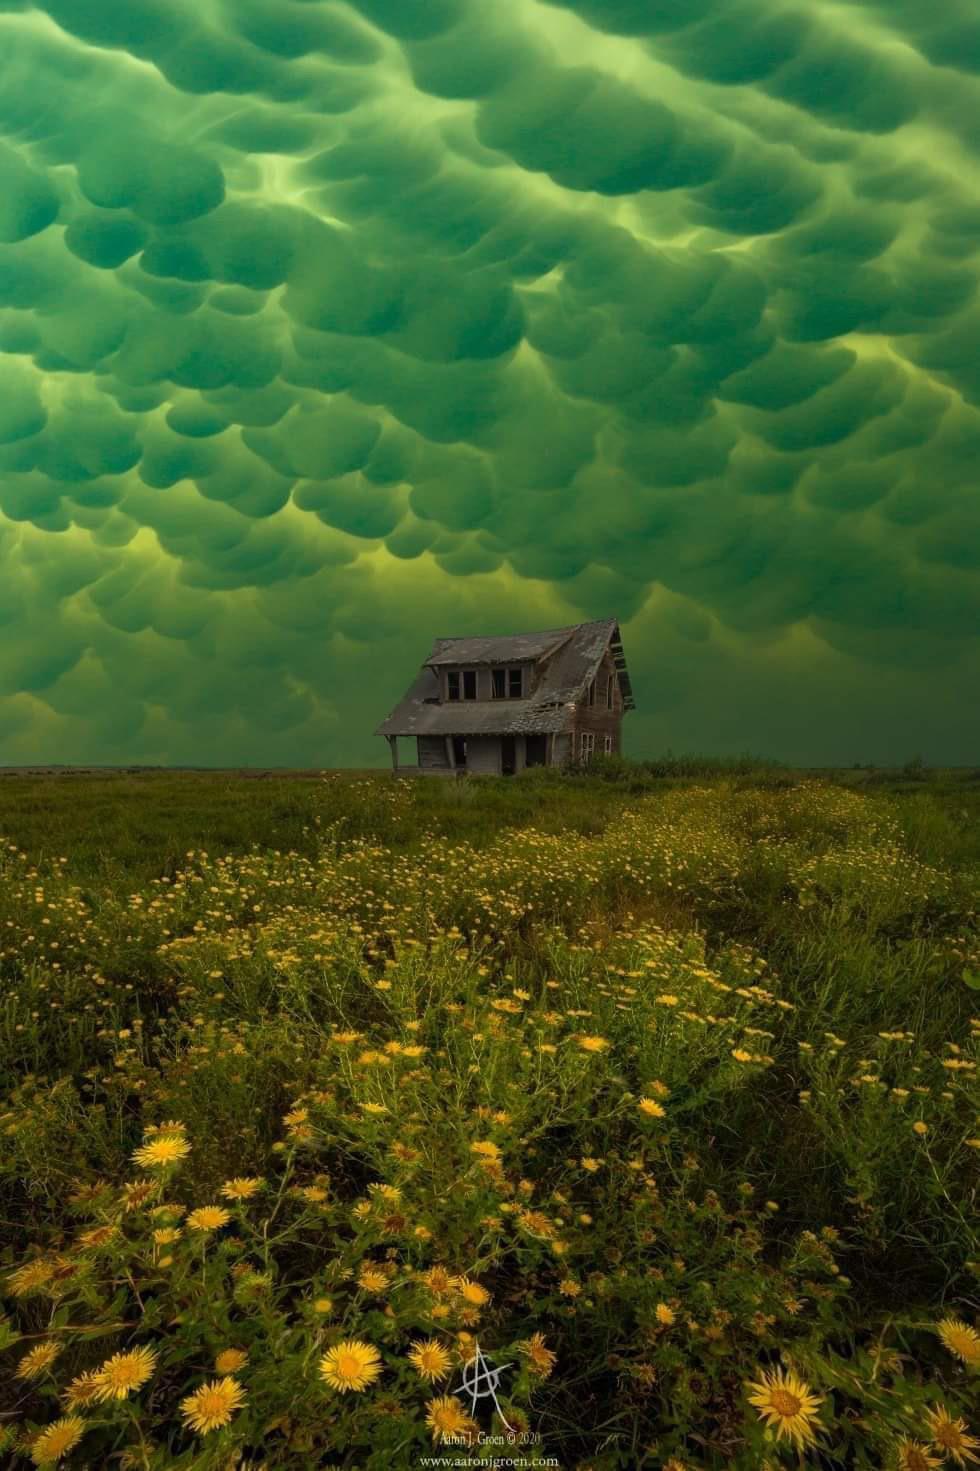 These clouds over this abandoned house look like they’re out of Courage the Cowardly Dog